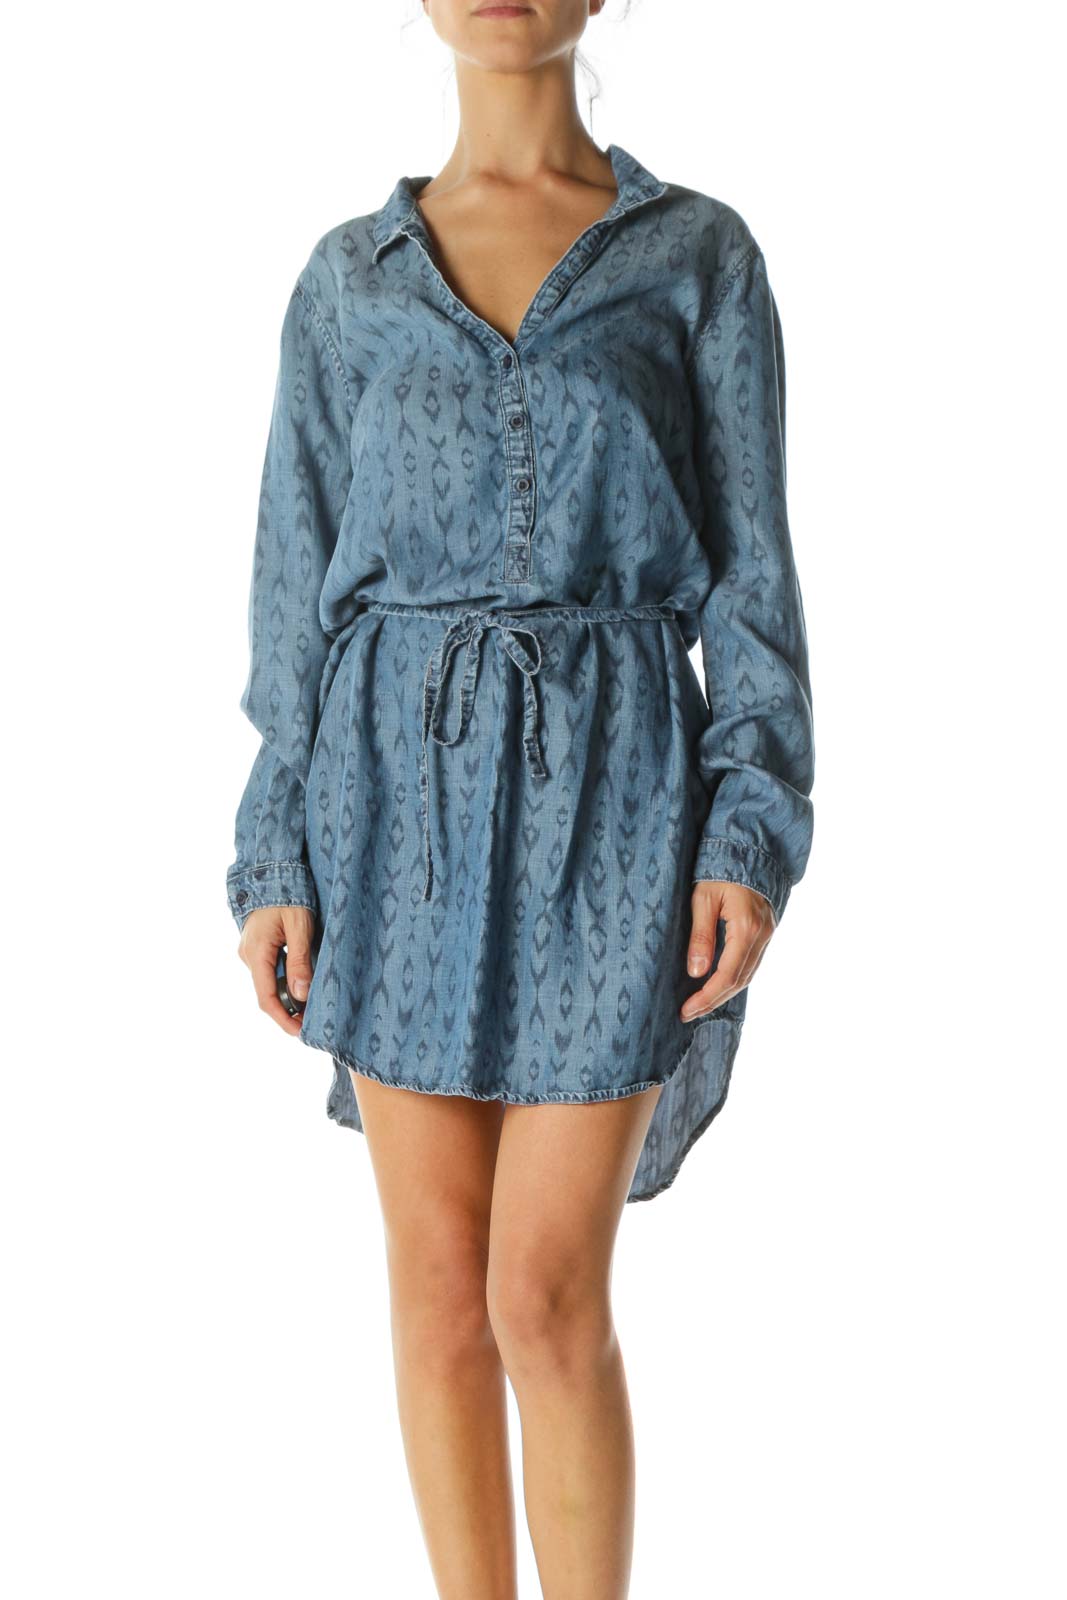 Blue Printed Belted Buttoned Denim-Style Dress Front